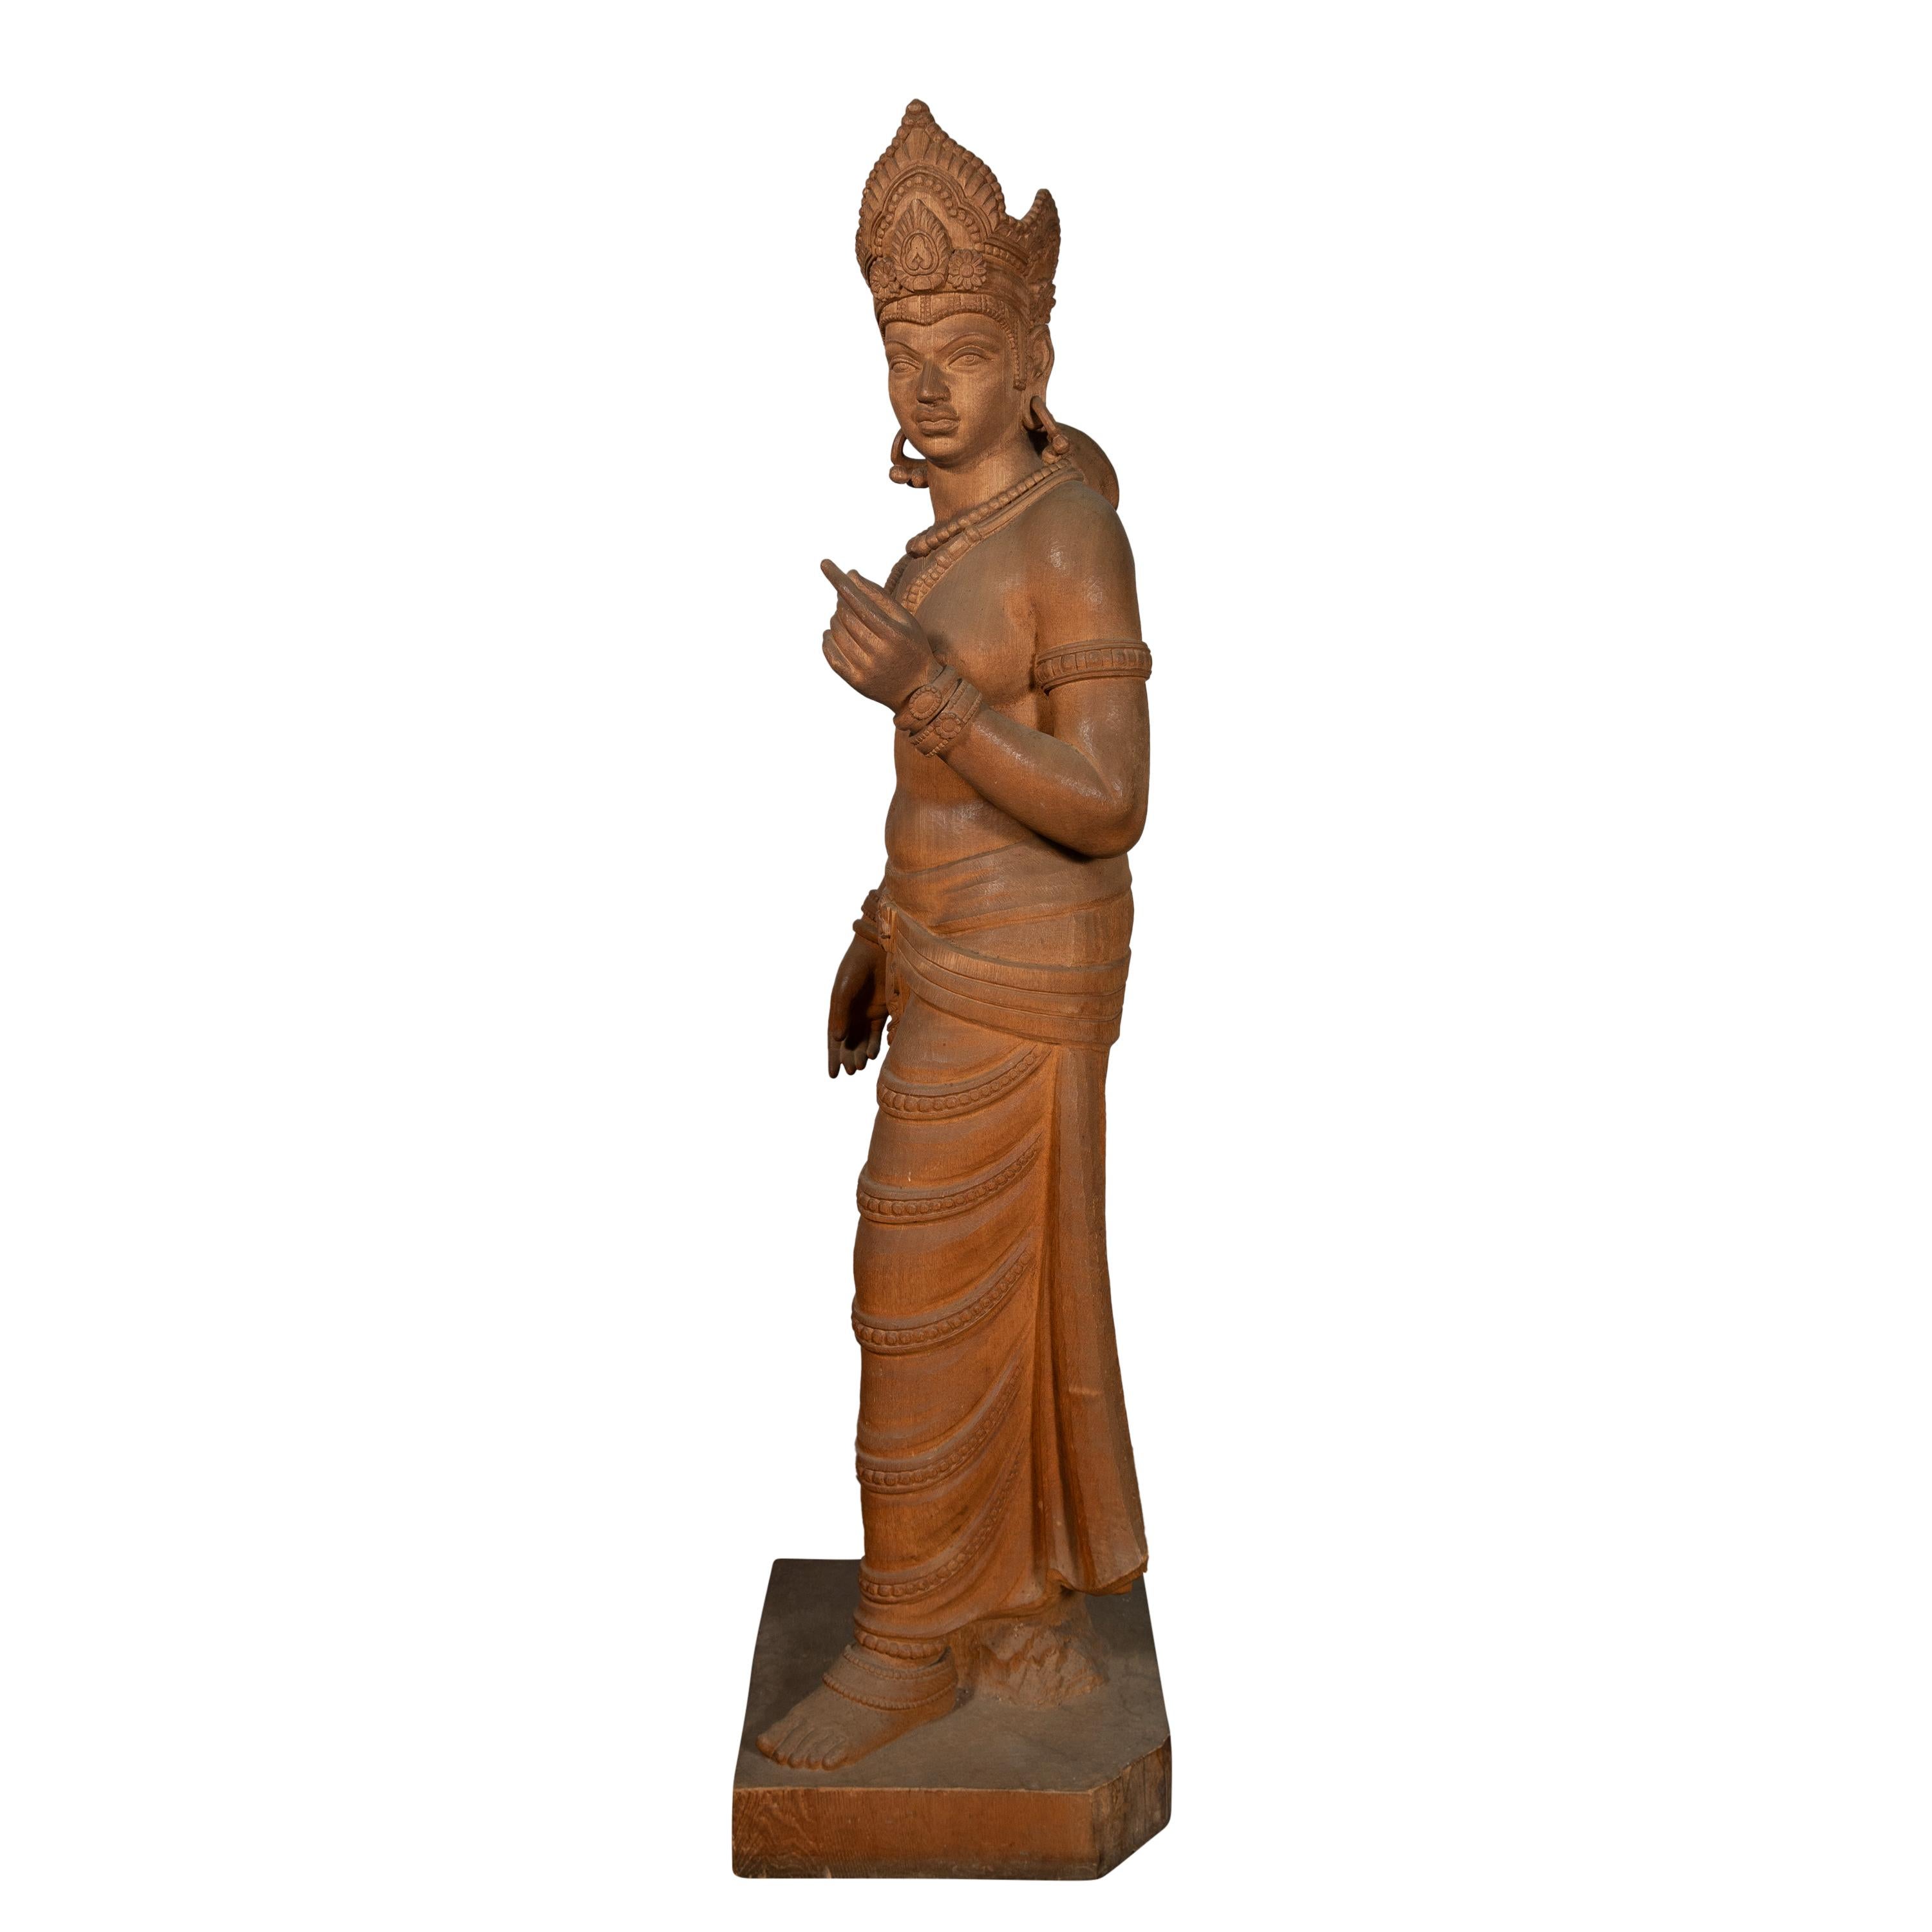 A life-size carved wood sculpture of the Hindu goddess Parvati. Parvati, the consort of Lord Shiva, is often depicted as a symbol of divine strength, love, and fertility in Hindu mythology.

The sculpture depicts goddess Parvati with distinct